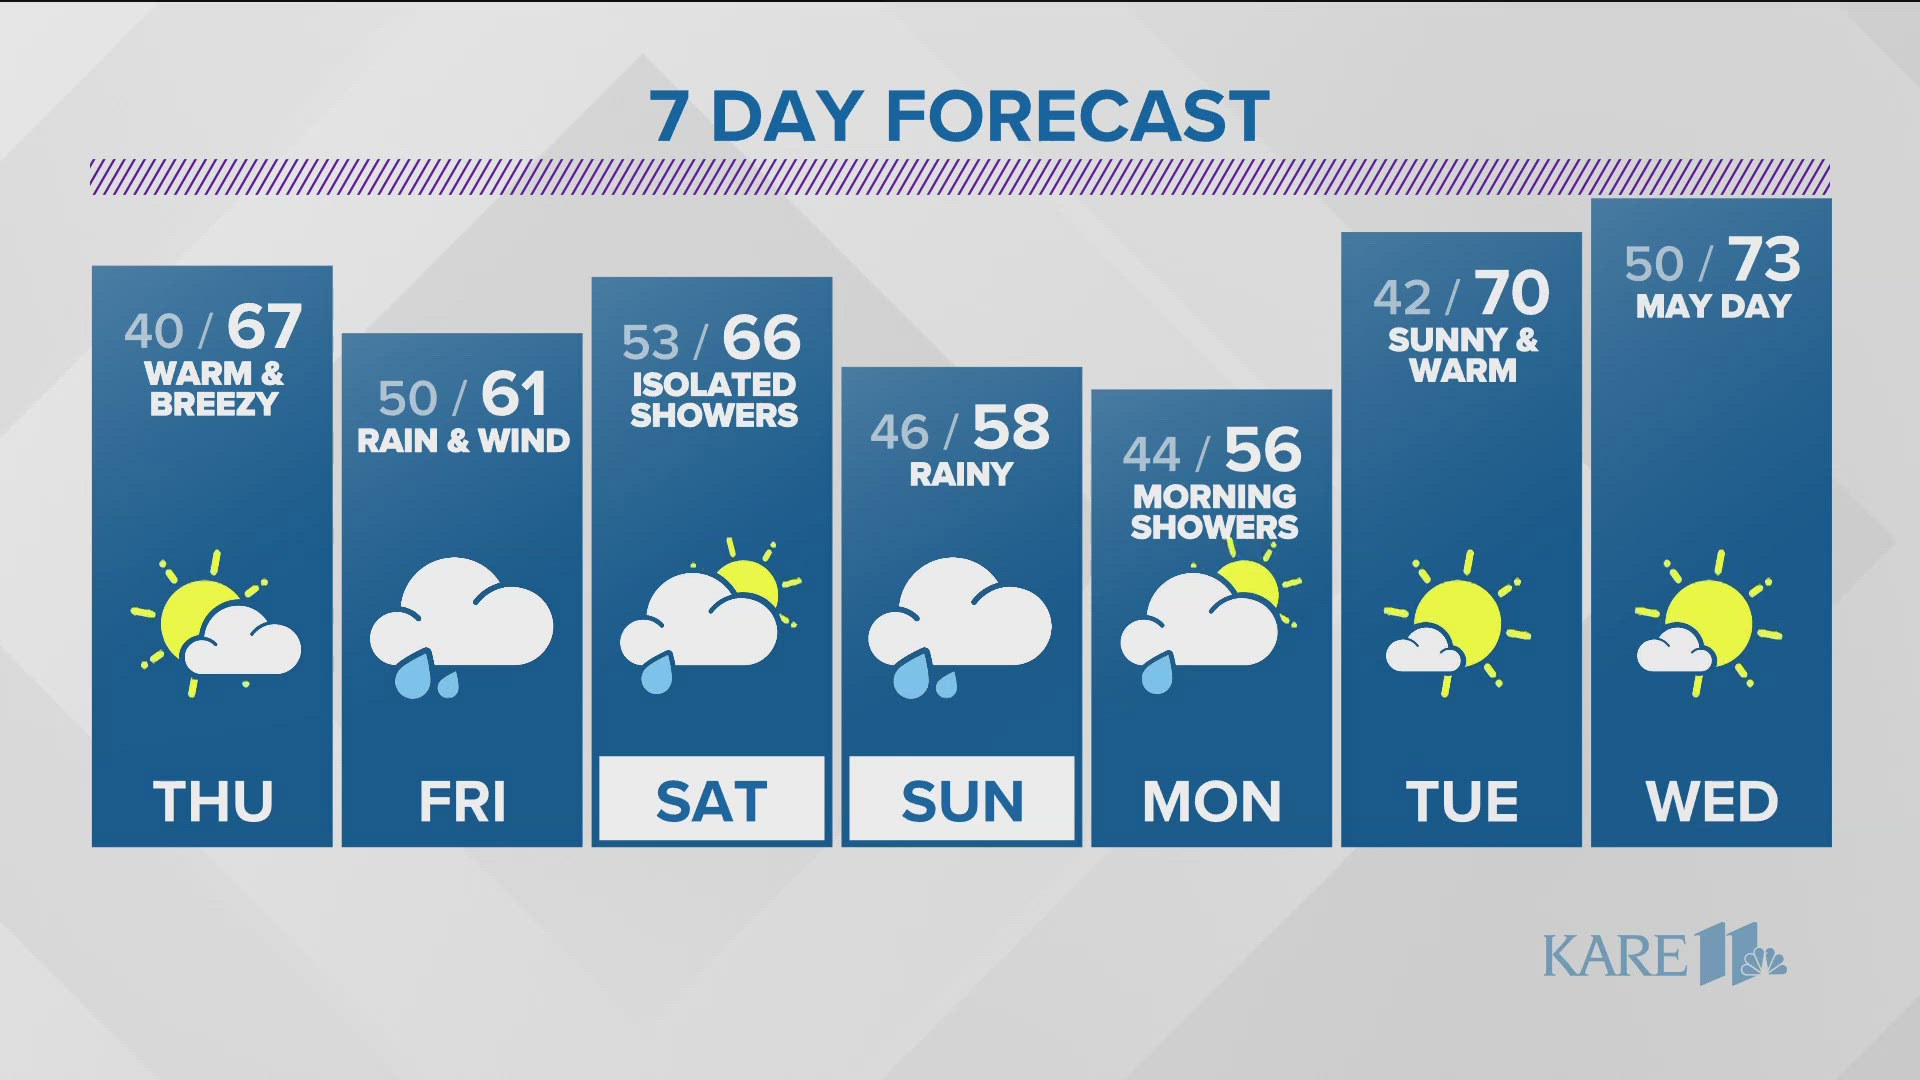 Dry and sunny weather is back before waves of rain move in for the weekend.